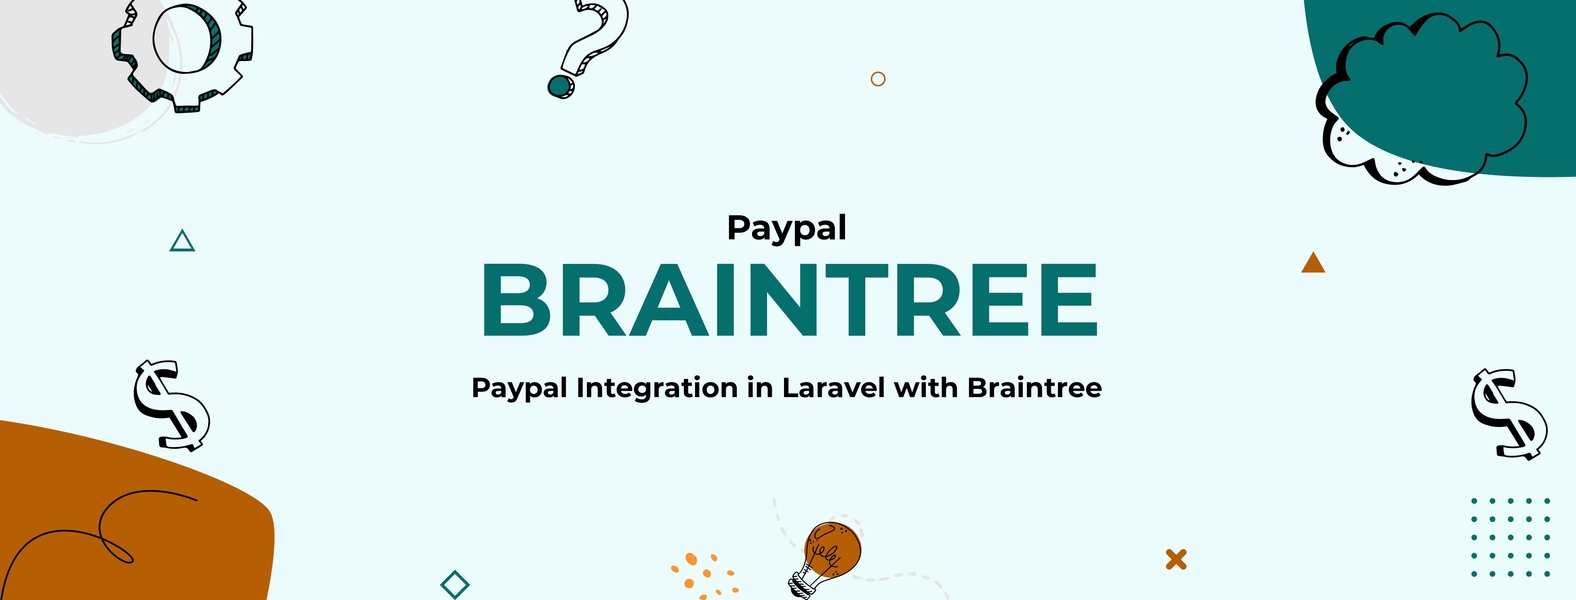 Paypal Integration in Laravel with Braintree cover image